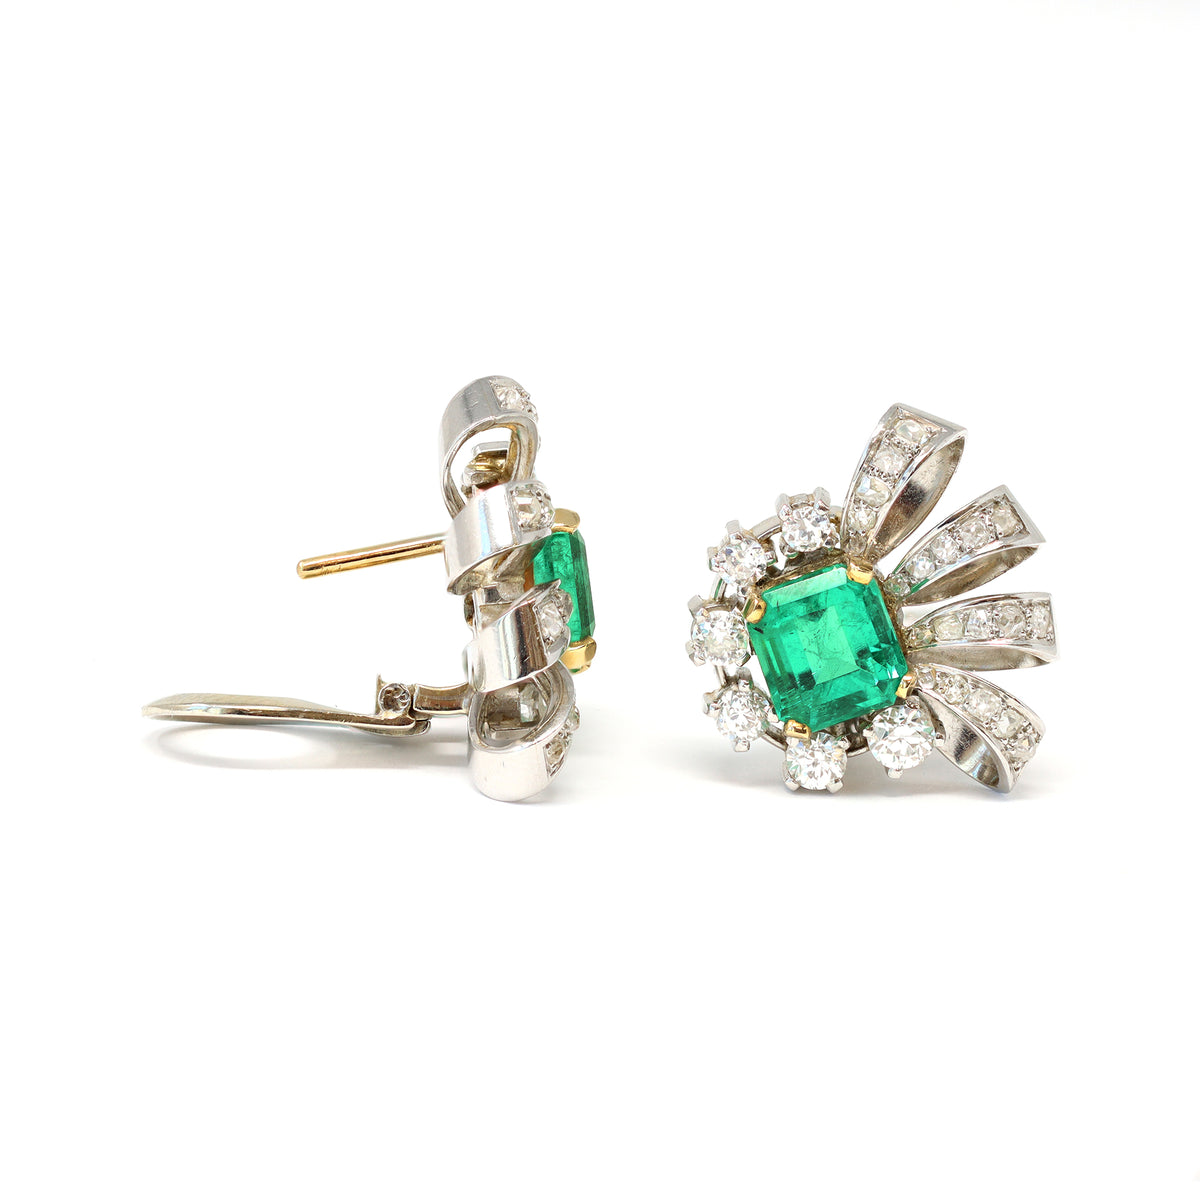 Pair of Emerald and Diamond Clip on Earrings in Platinum, Circa 1940 front and side view